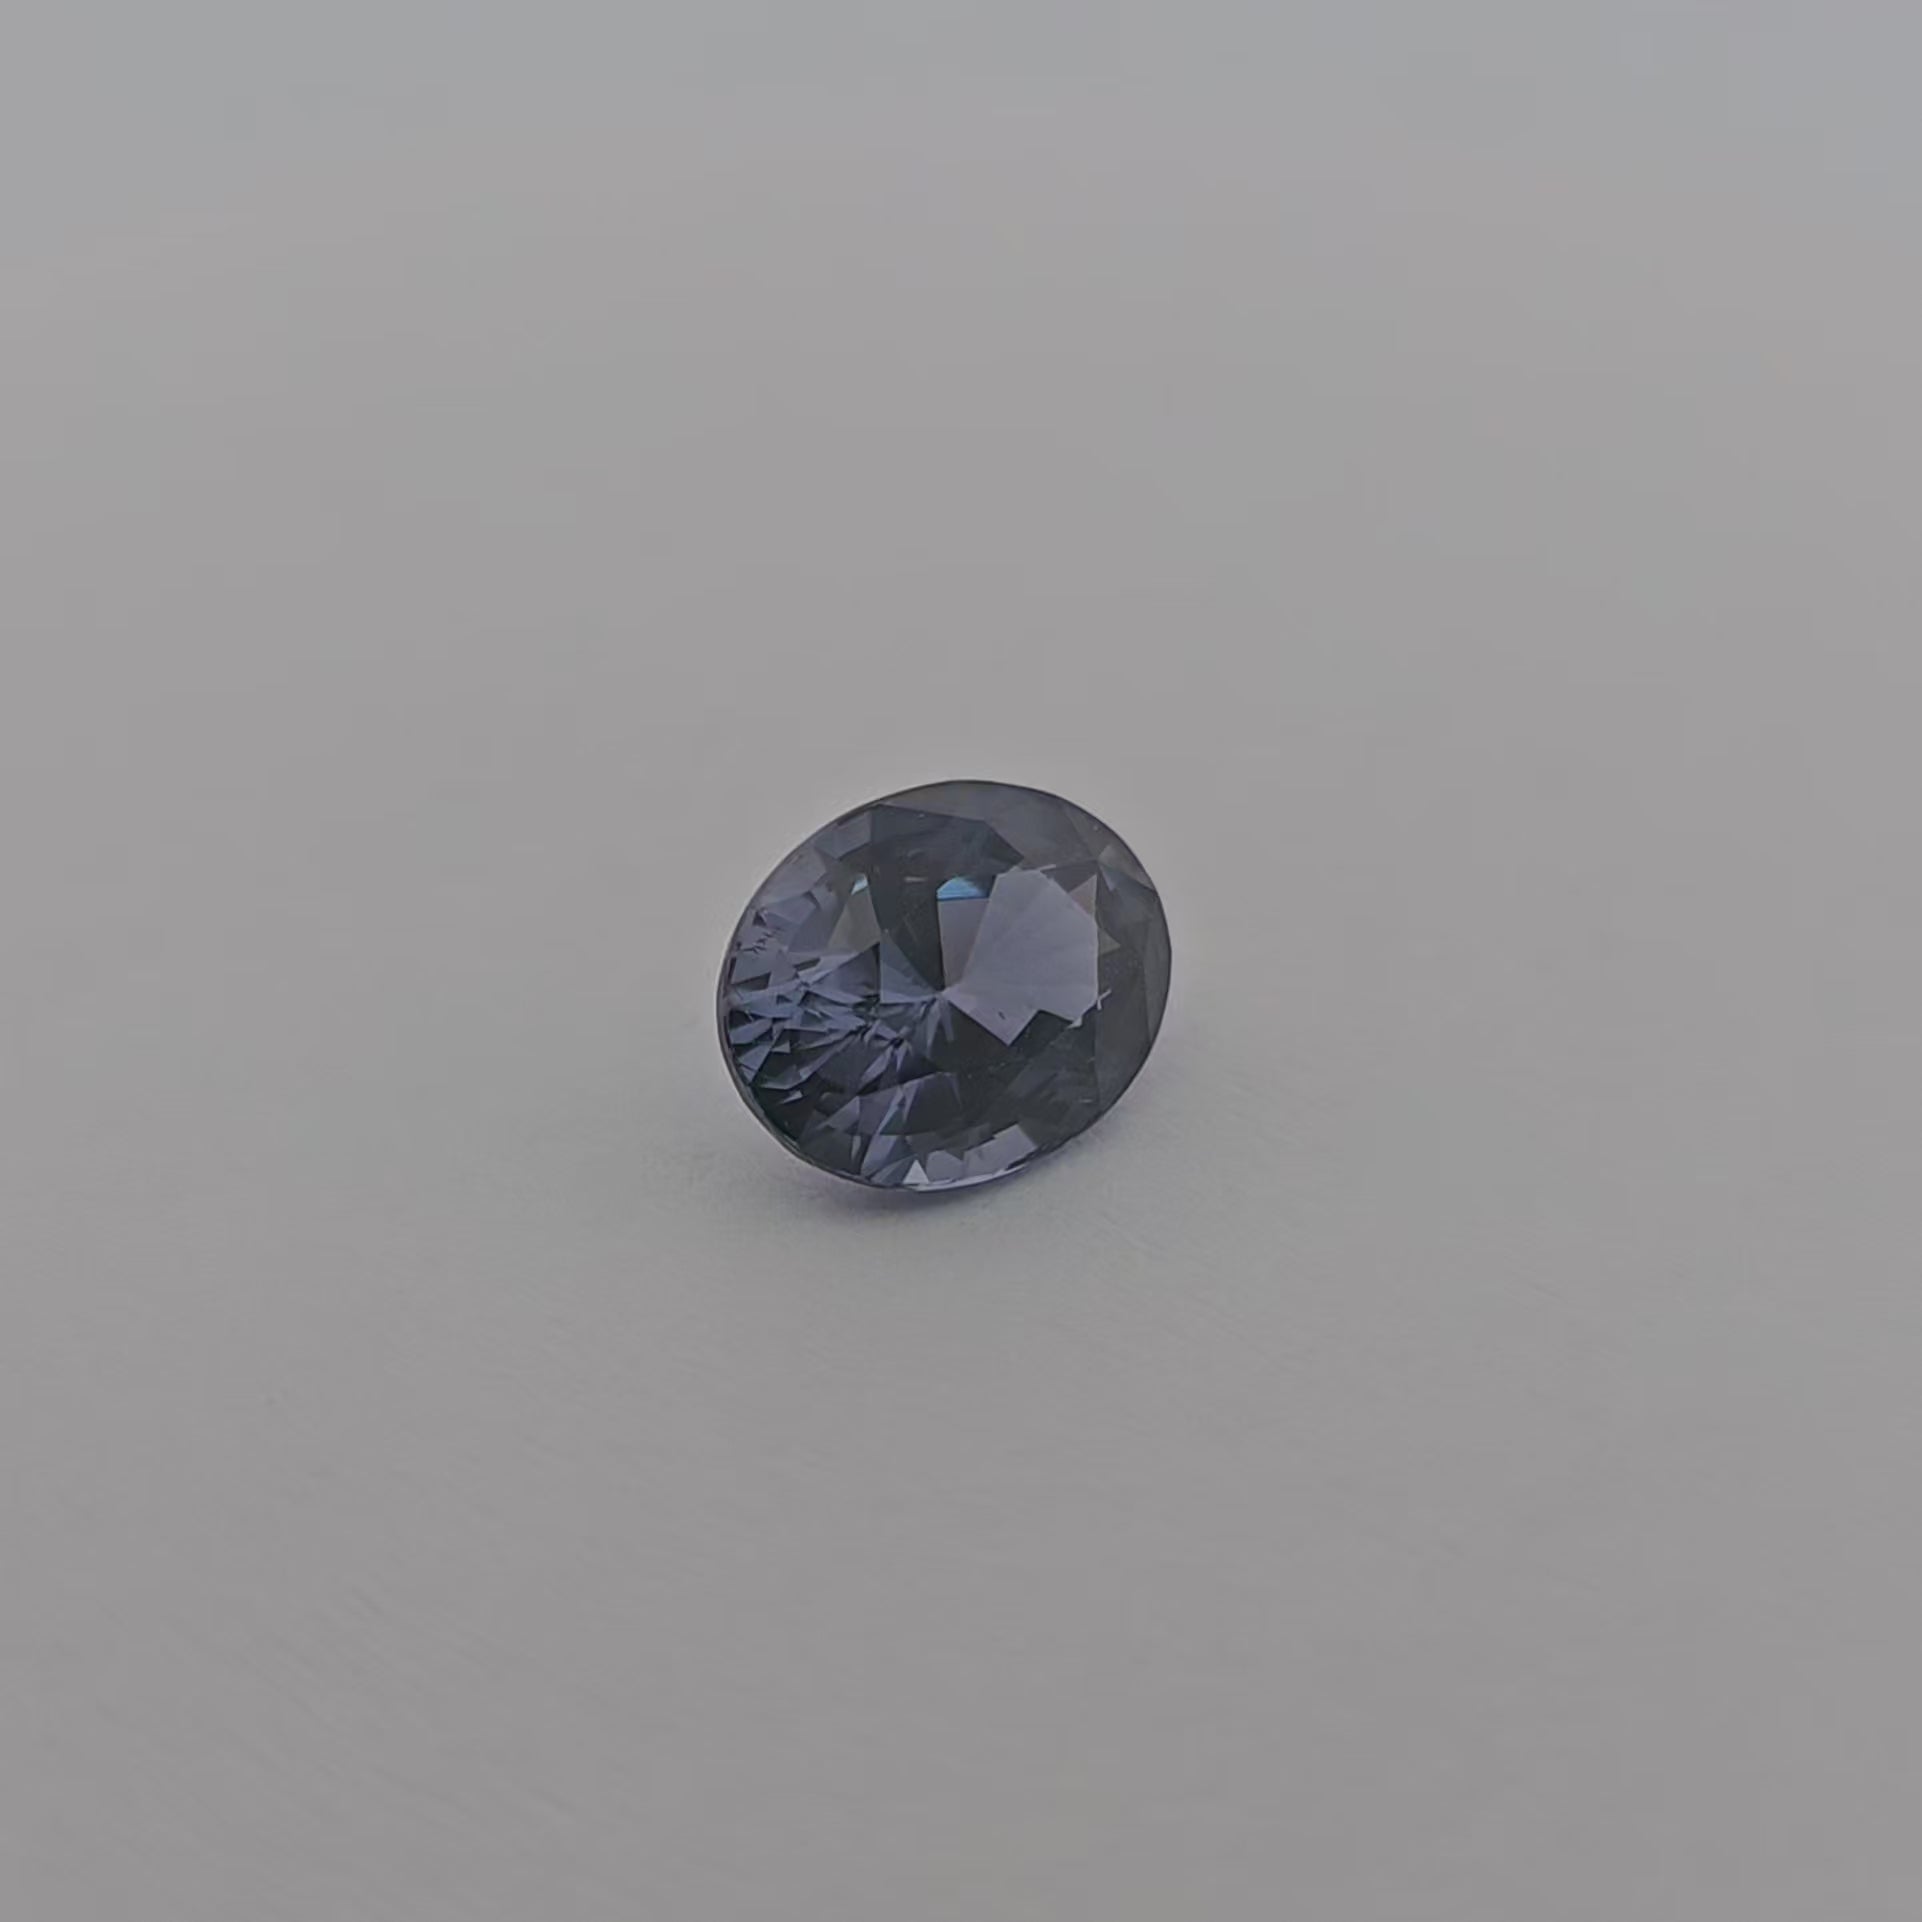 loose Natural Blue Spinel Stone 3.61 Carats Oval Shape (10.16 x 8.02 x 6.07 mm)